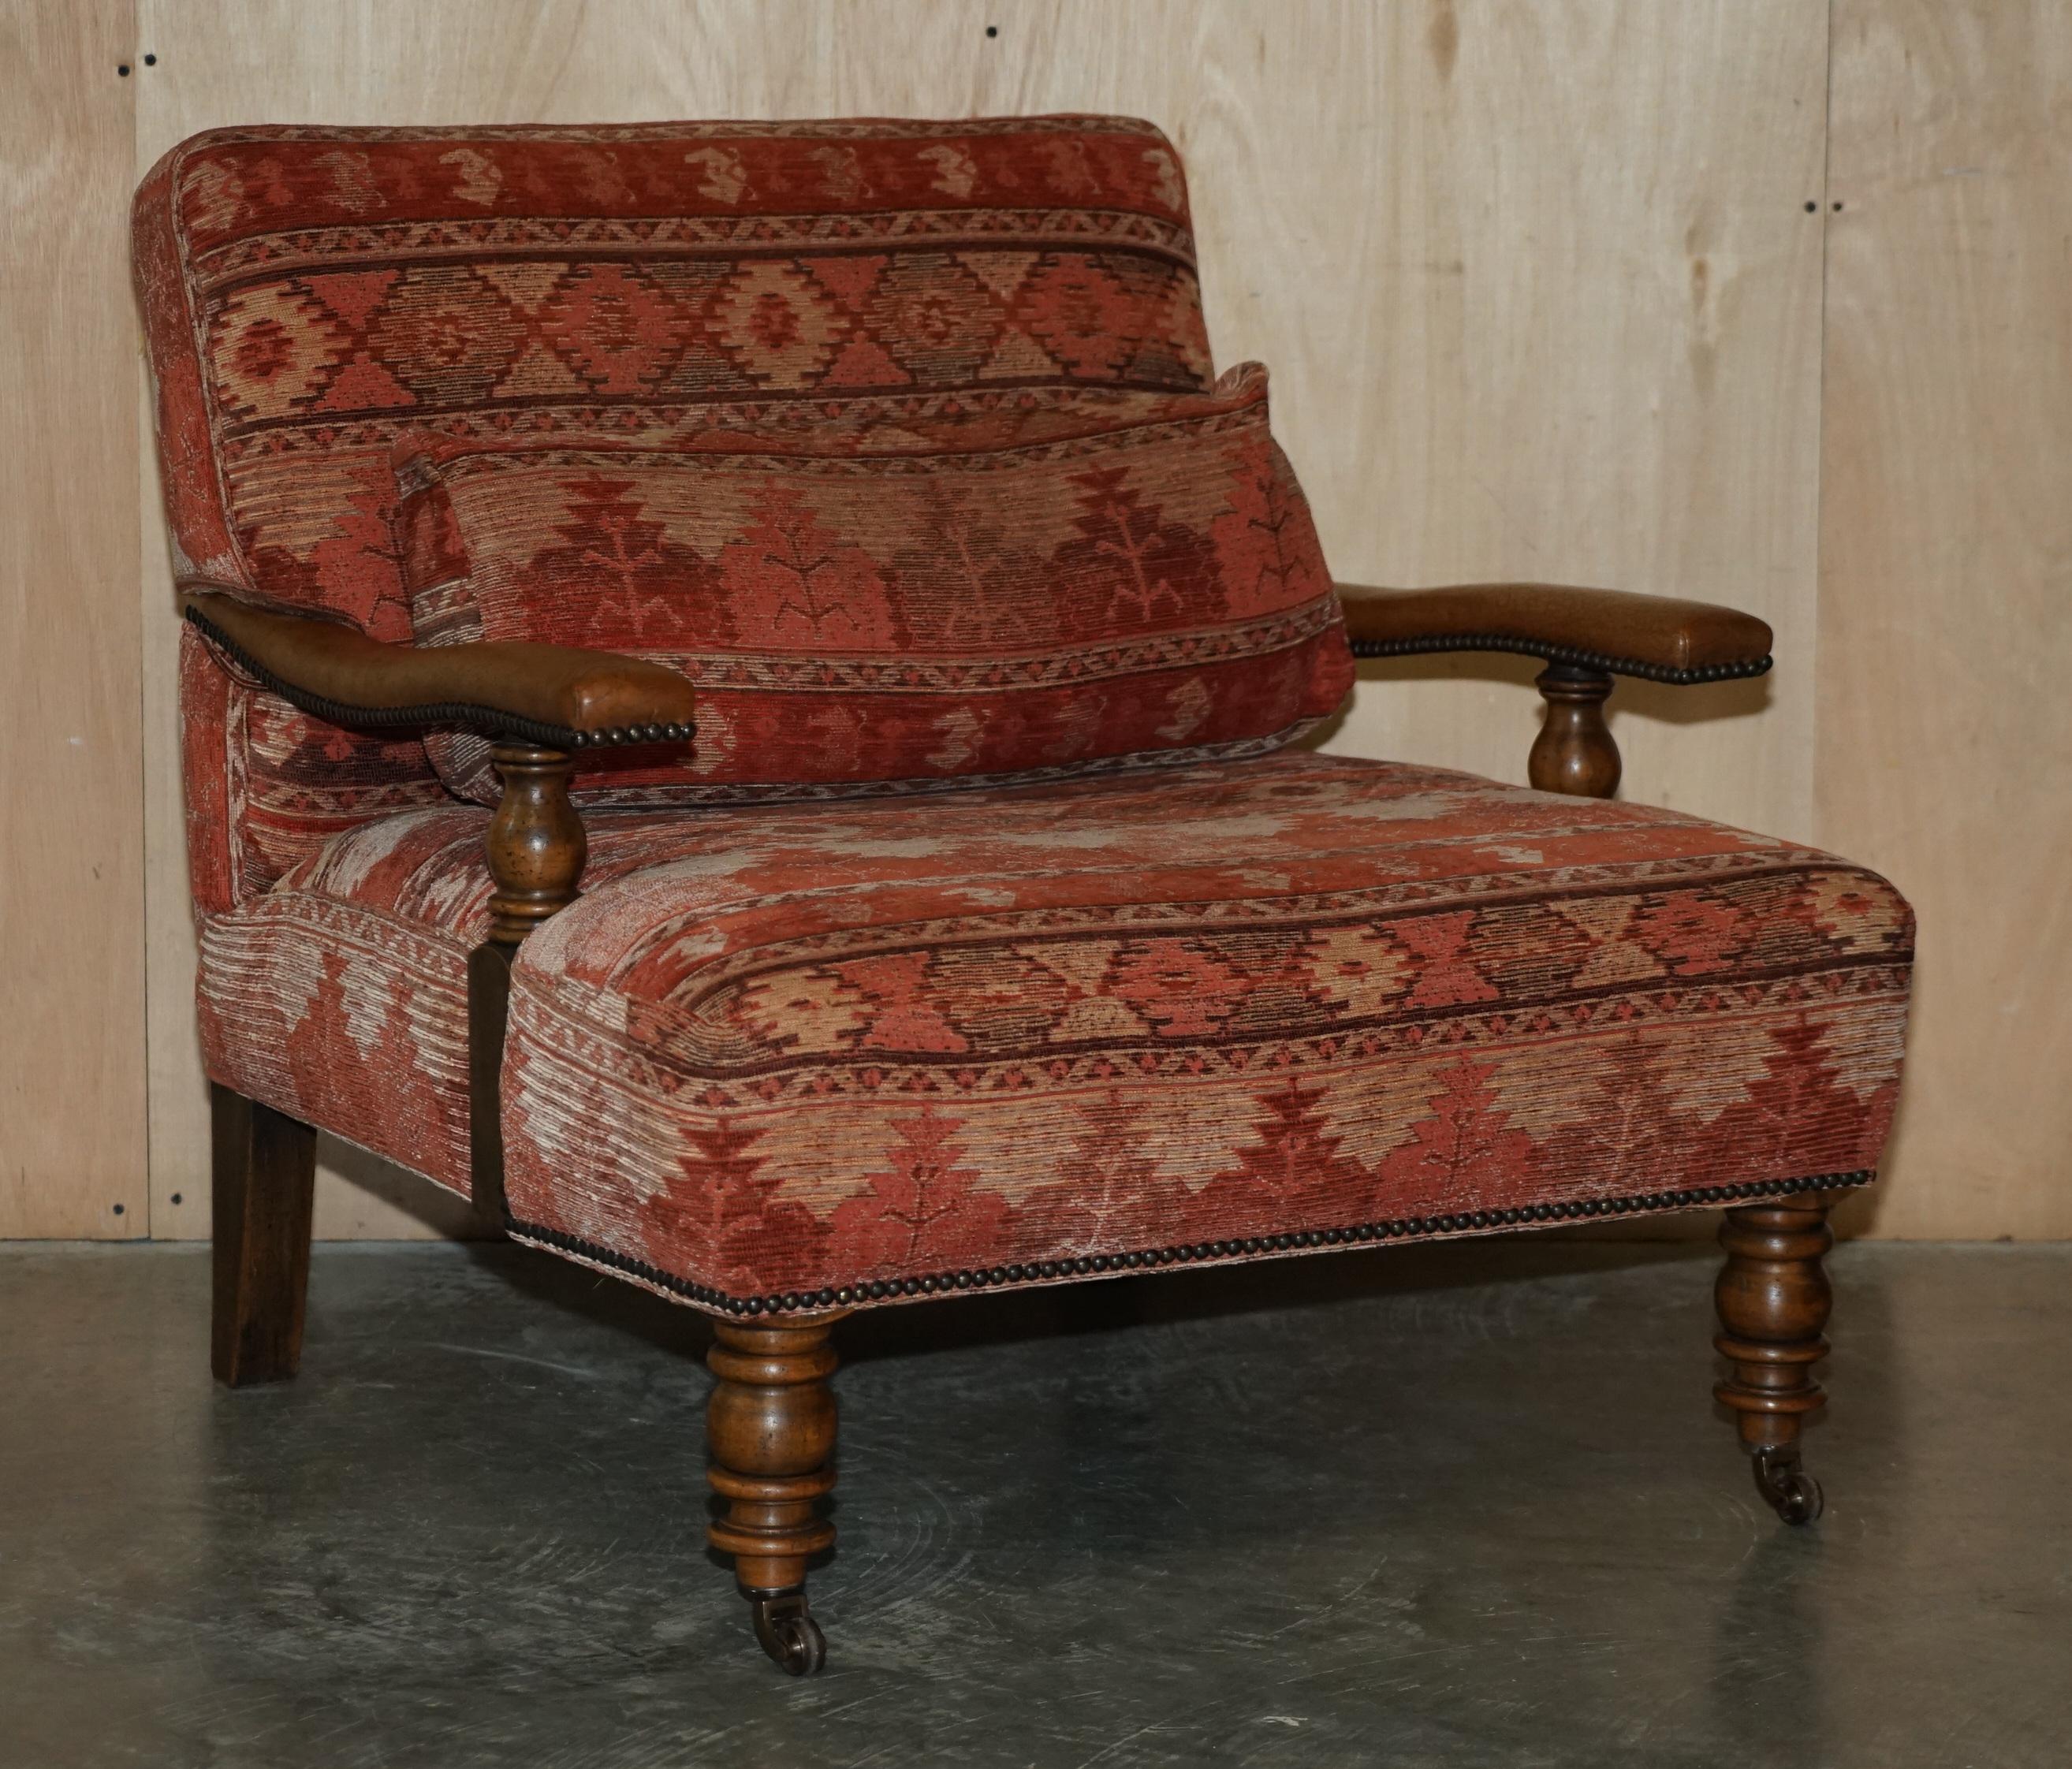 We are delighted to offer for sale this stunning pair of hand made vintage Kilim Library reading armchairs with hand dyed brown leather arms and lumbar support cushions that are feather filled

A very good looking well made and decorative pair of